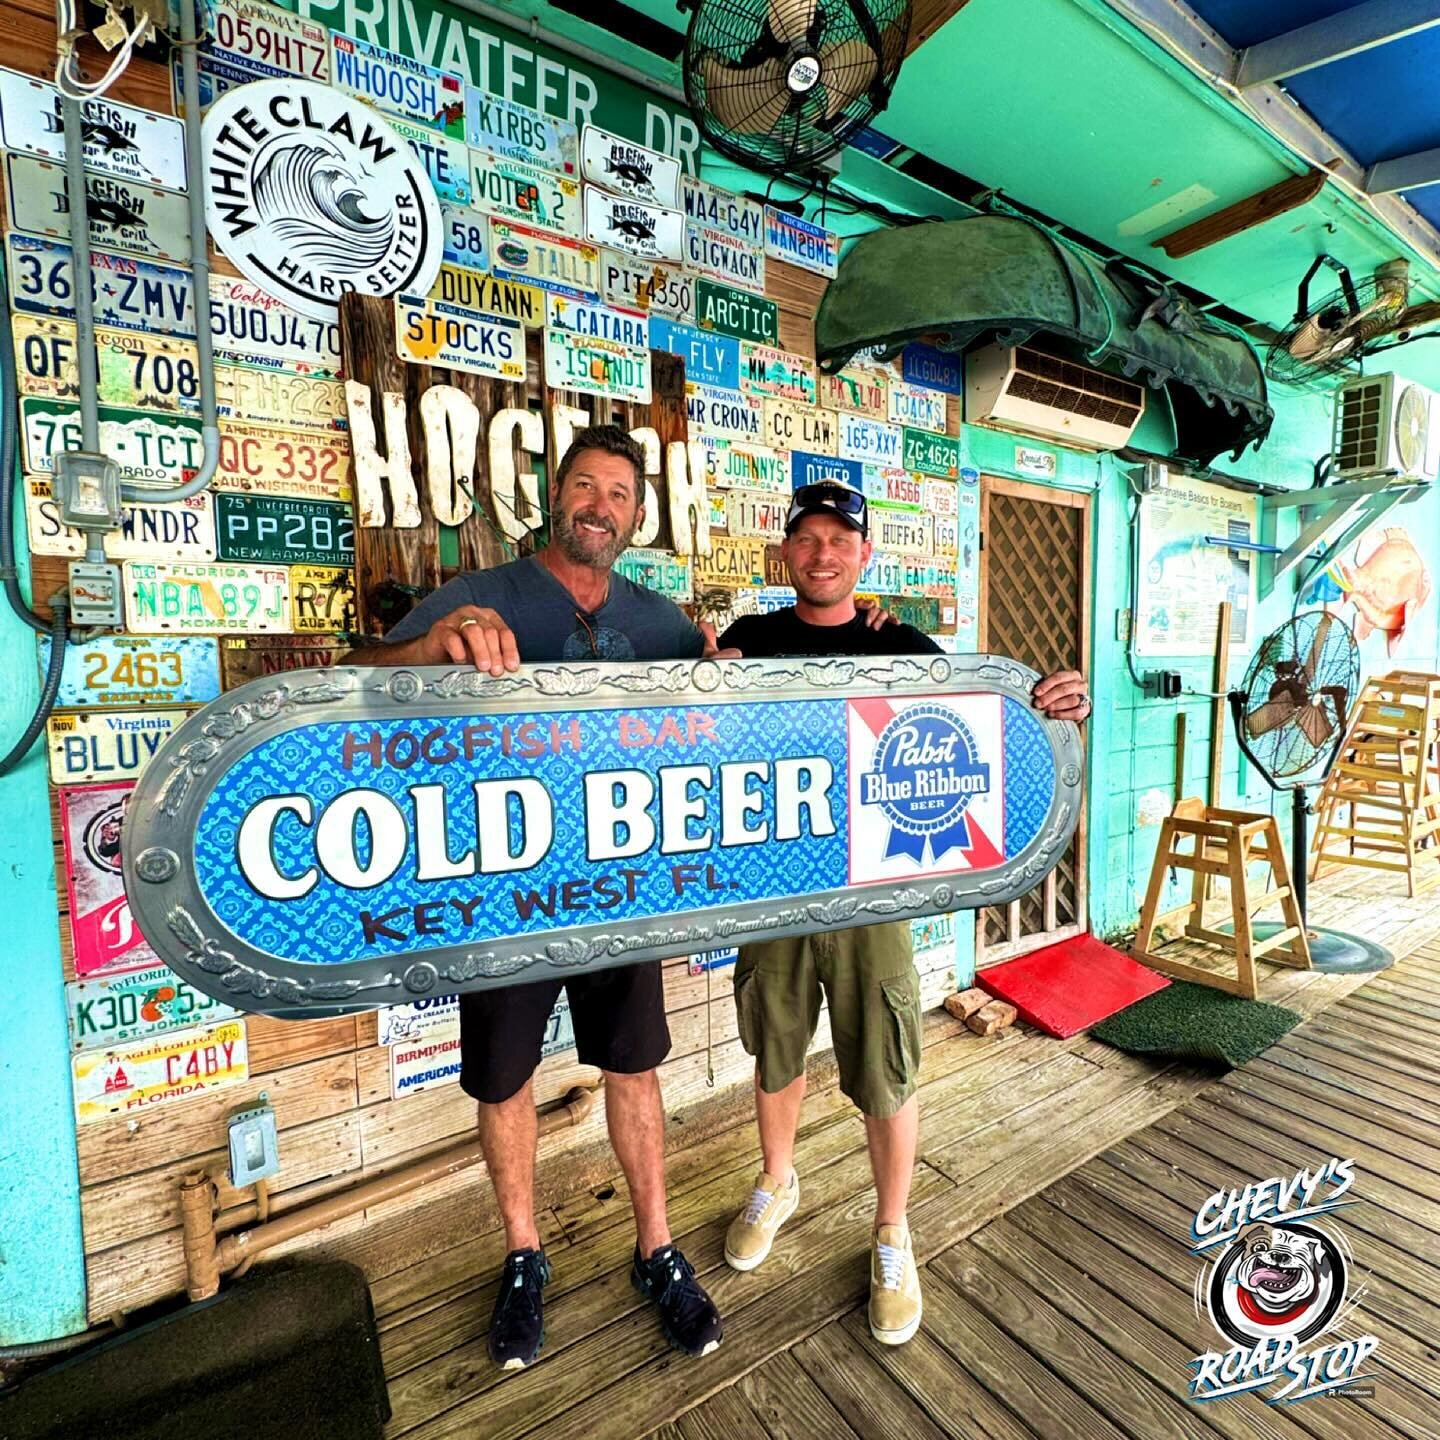 Biggest THANKS to great guy Bobby from @hogfish_bar in Key West for this awesome @pabstblueribbon sign and the amazing hospitality 🌴😎🙏🙌🏼
Whenever in the Keys, make sure to visit them🎣🍤